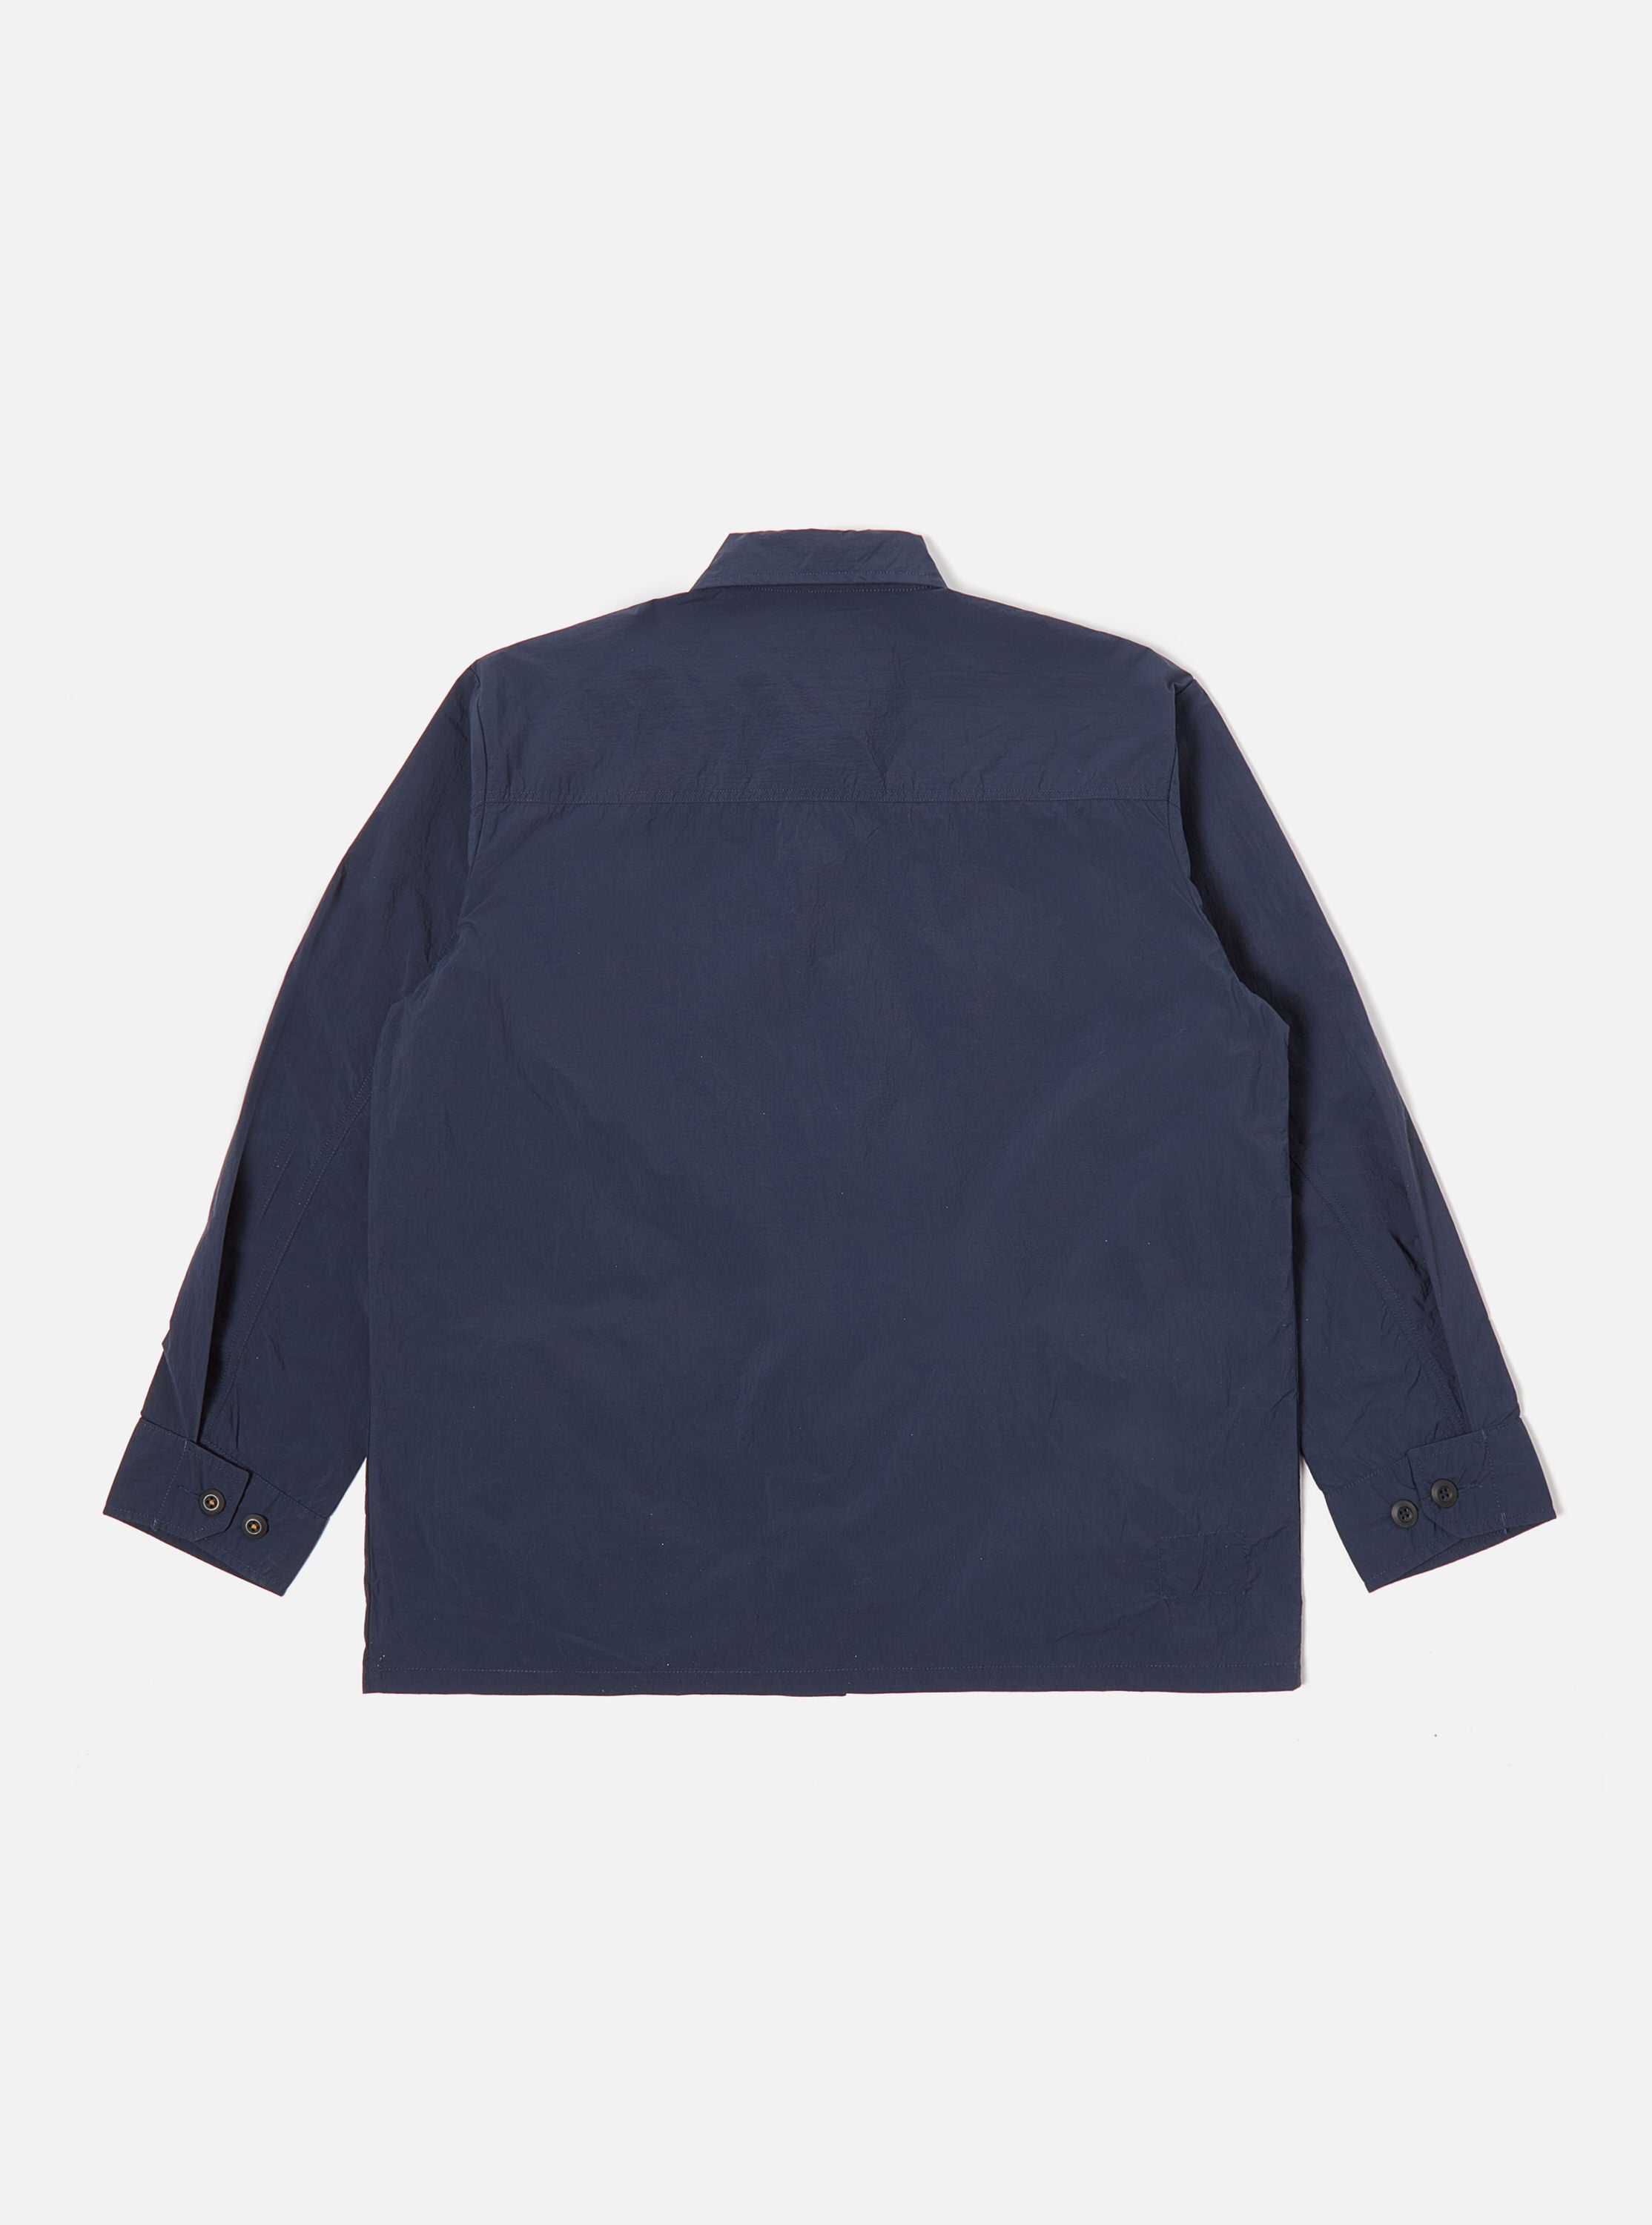 Universal Works Jungle Jacket in Navy Recycled Washed Nylon